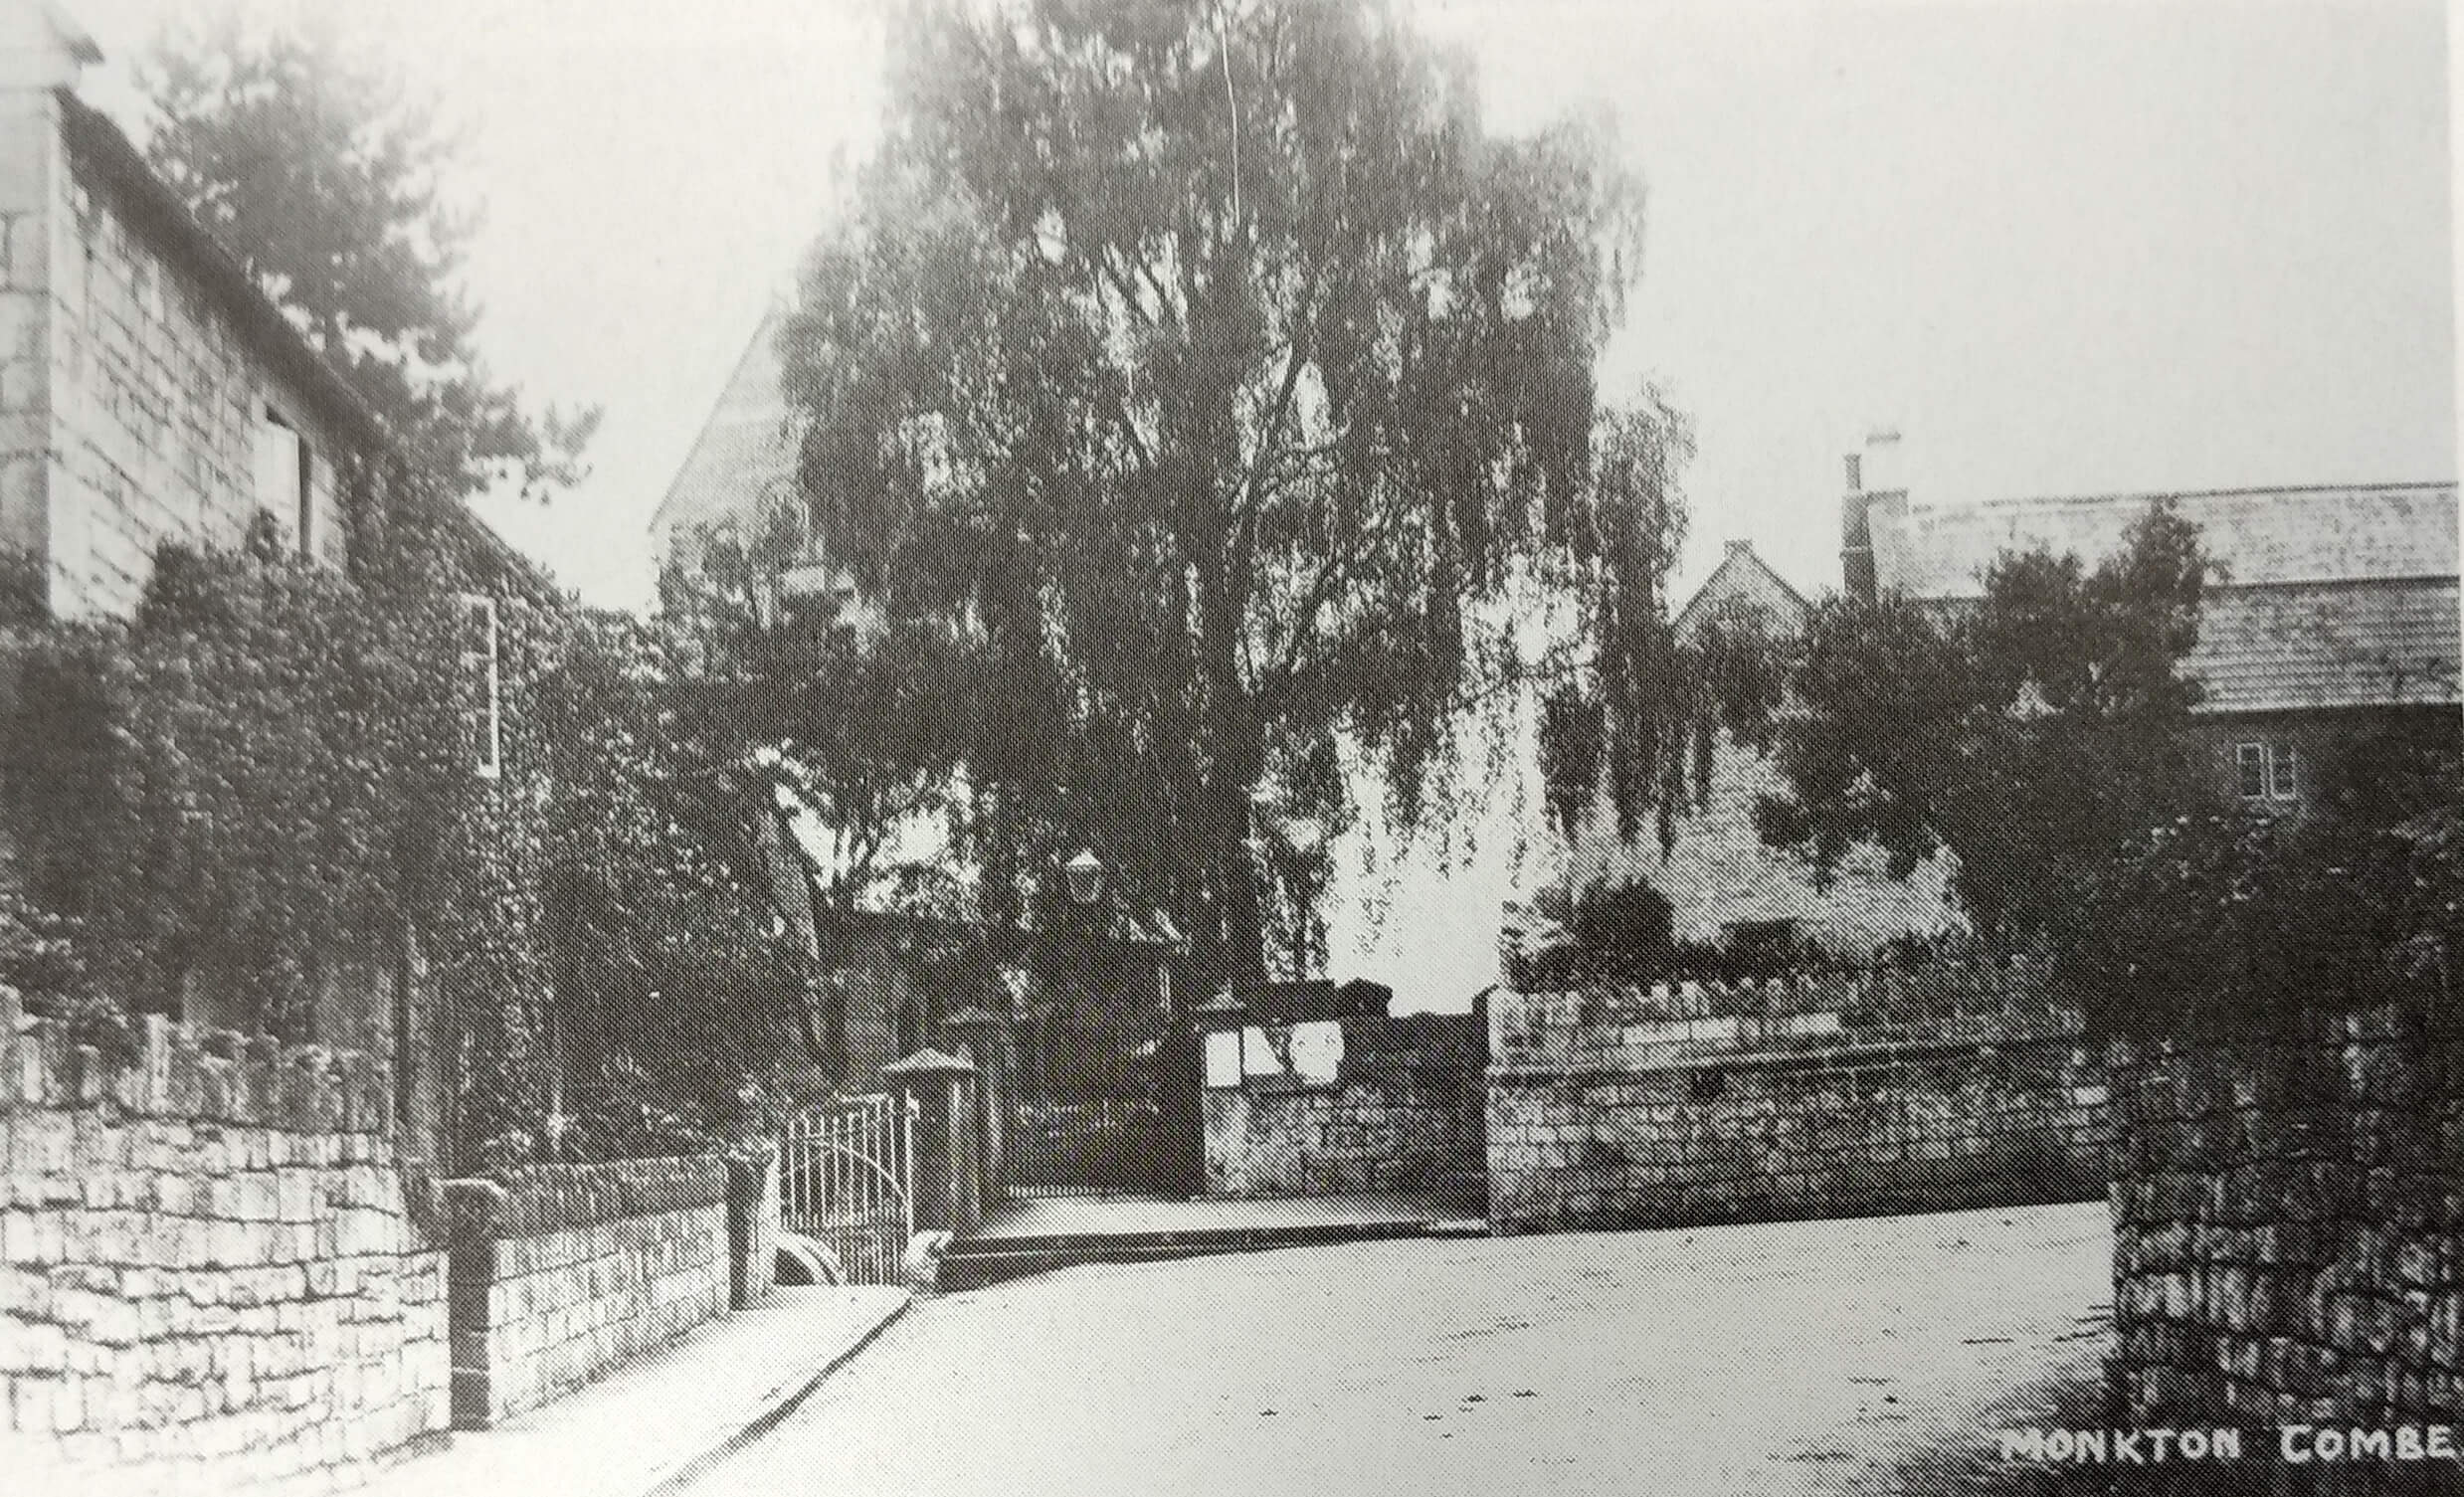 Monkton Combe by the church about 1912